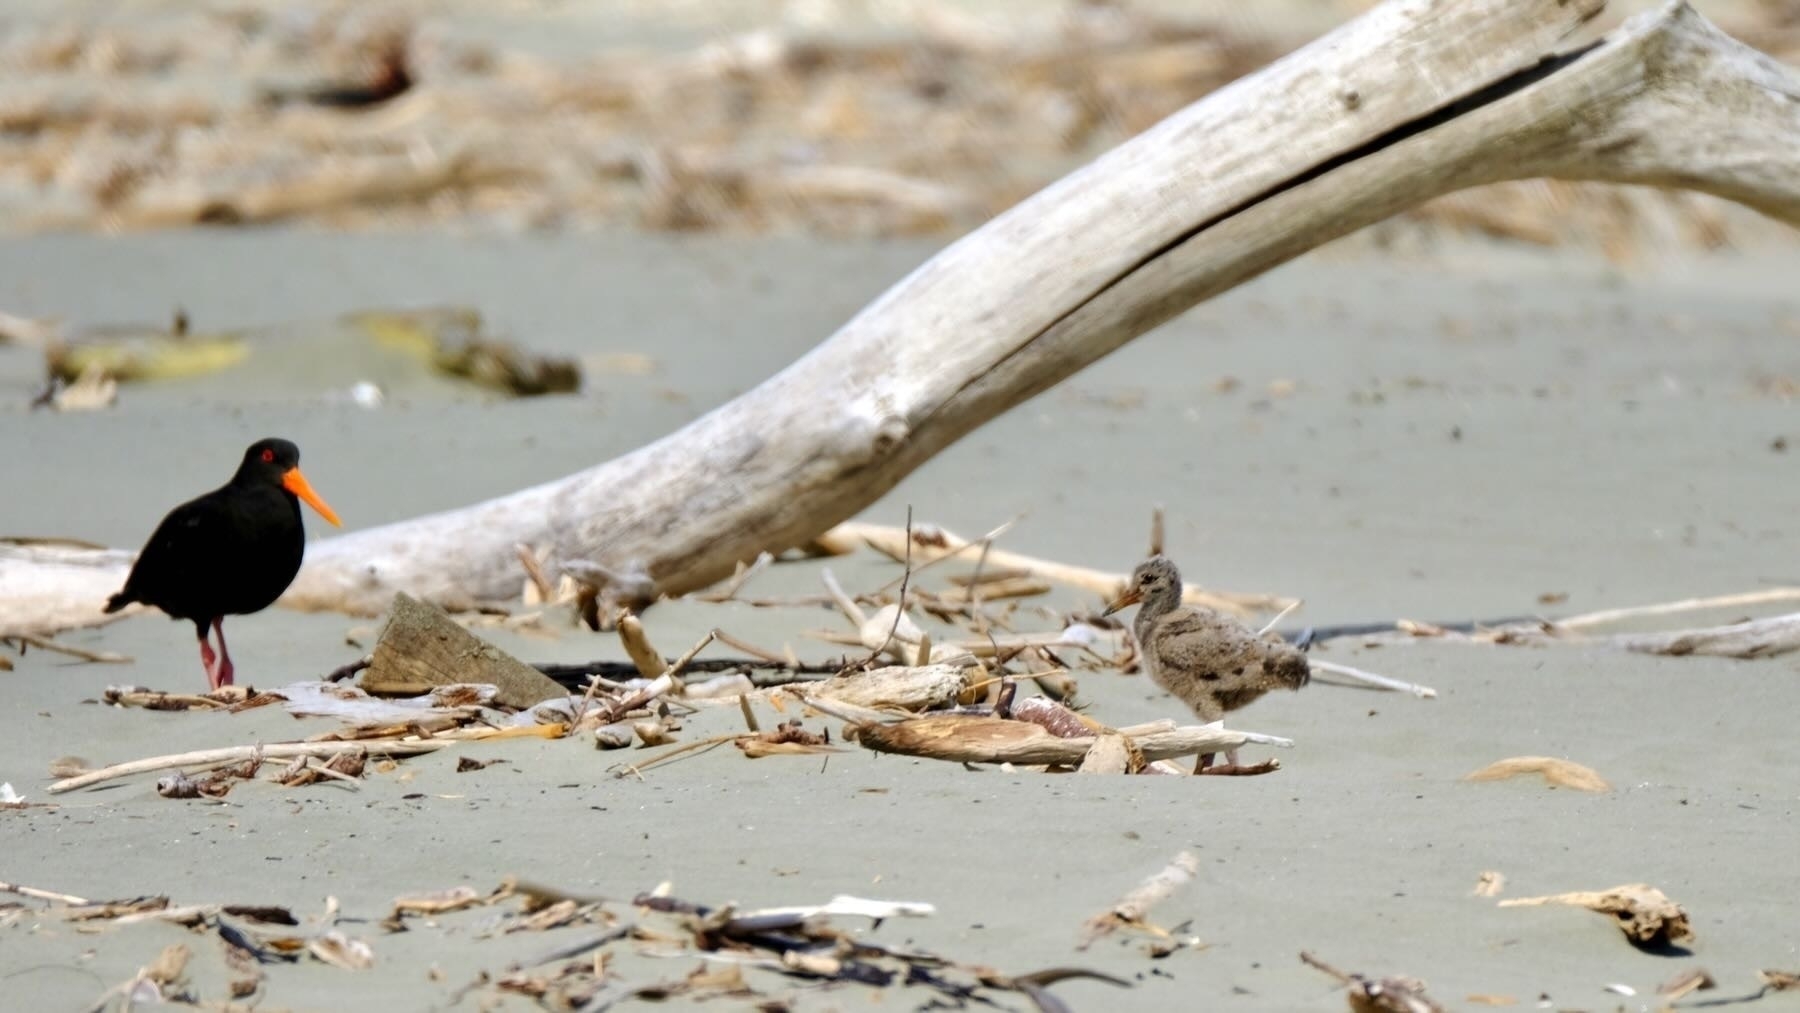 Oystercatcher with chick among driftwood. 